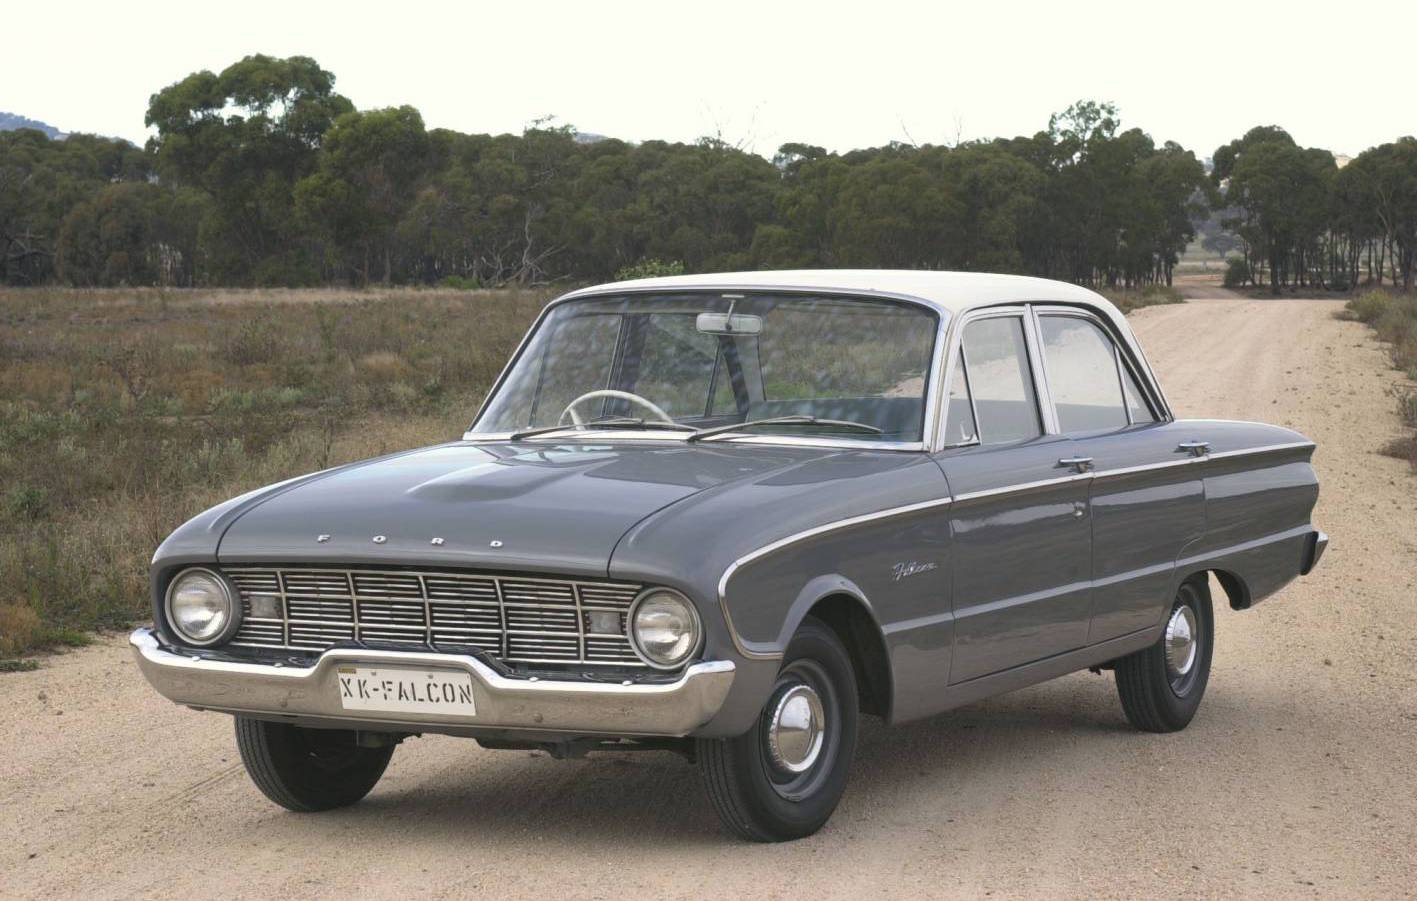 Ford Falcon to be revived with new model inspired by original